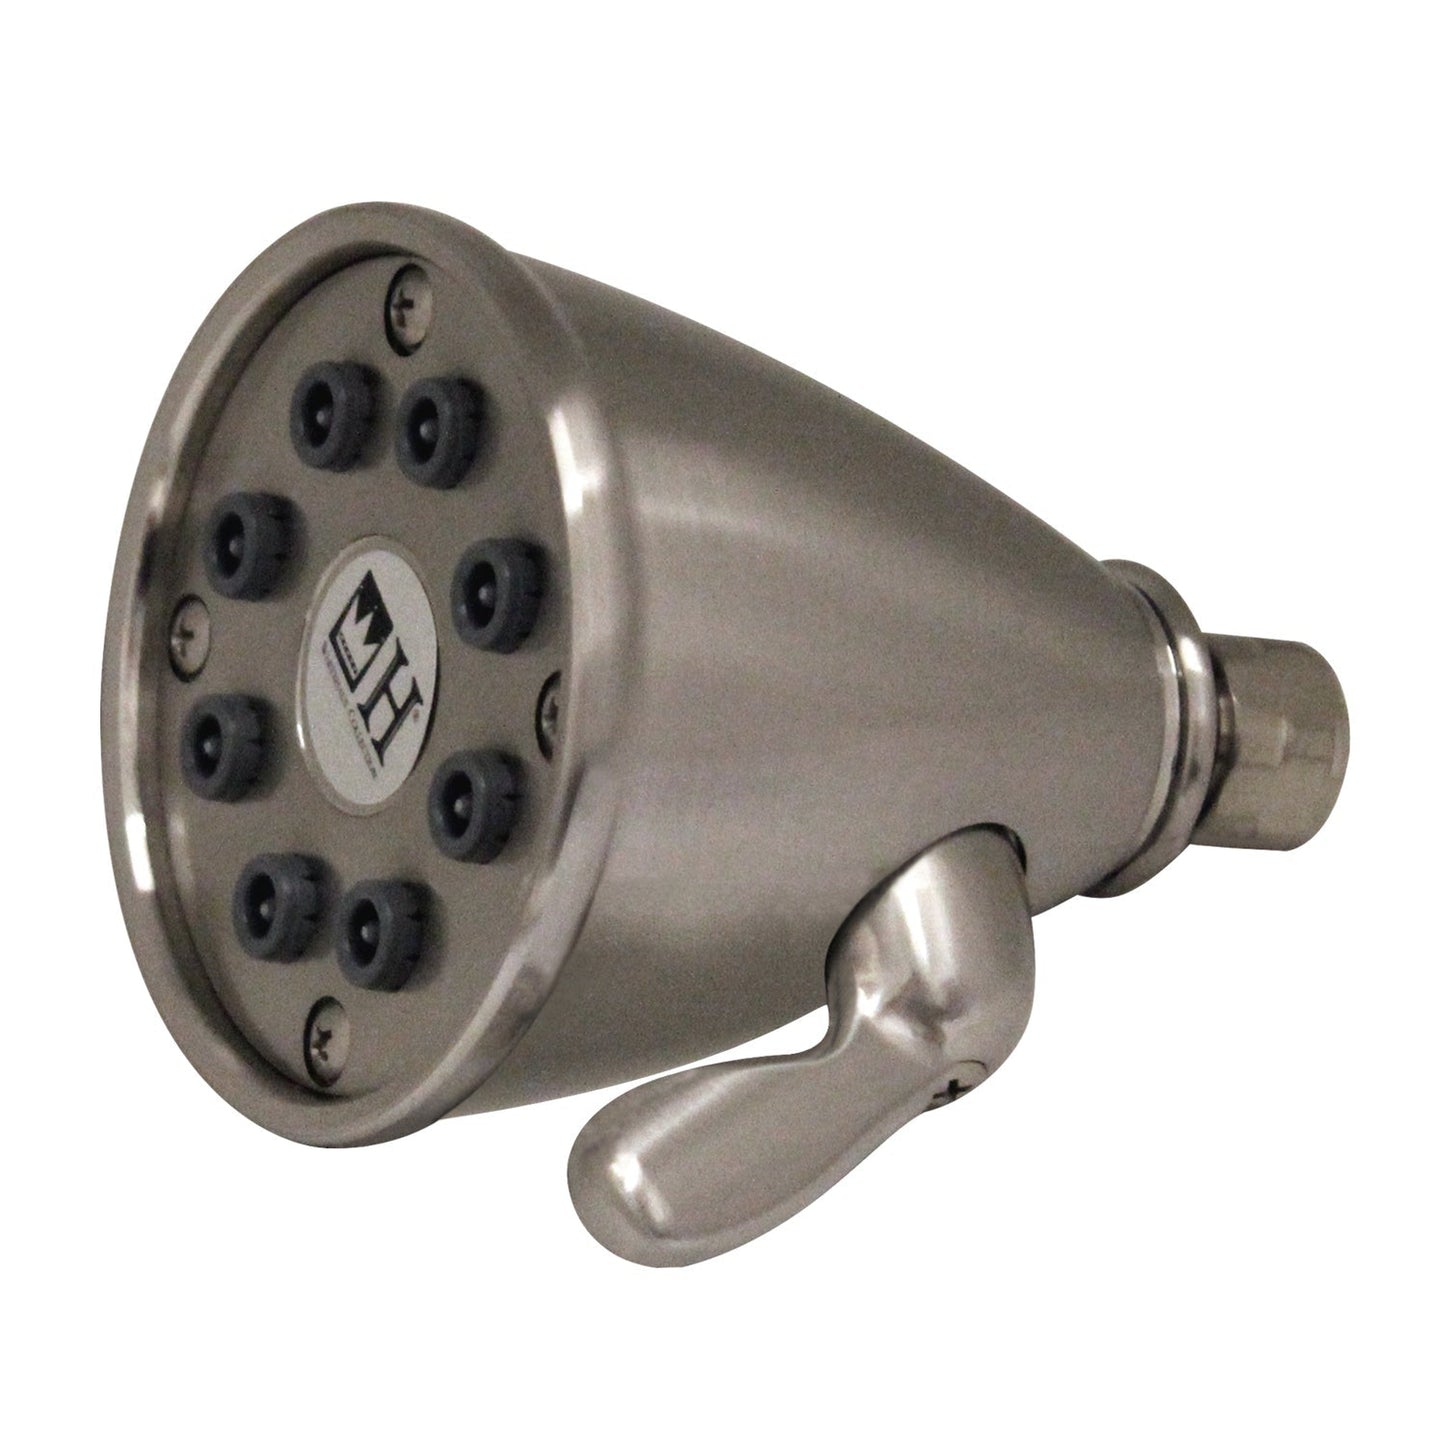 Whitehaus Showerhaus WH139-BN Brushed Nickel Round Showerhead With 8 Spray Jets - Solid Brass Construction With Adjustable Ball Joint